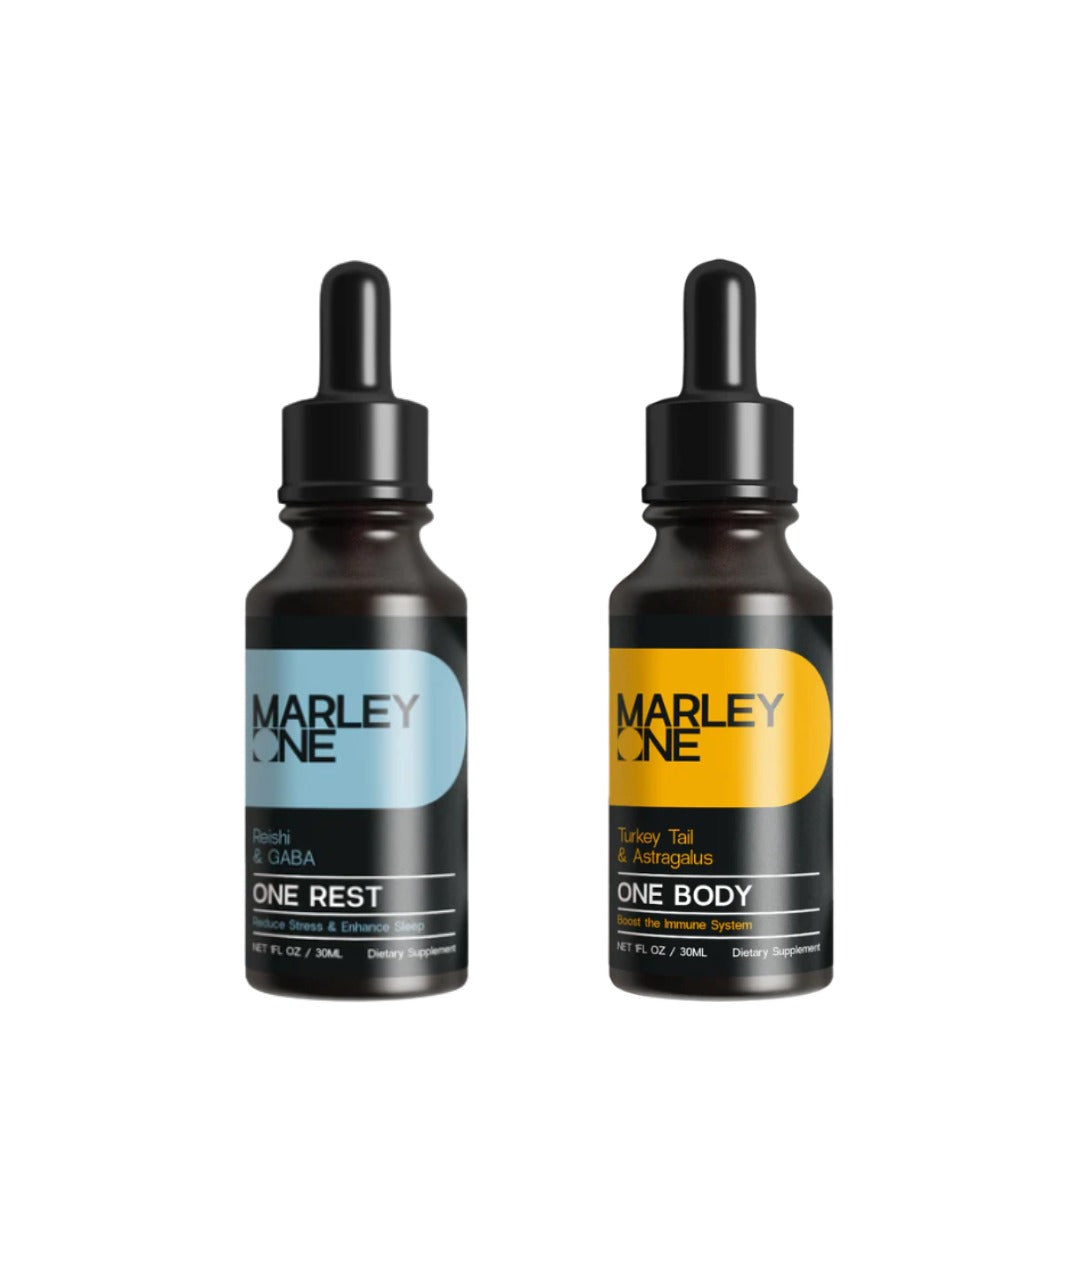 Marley One - 2 Product Set